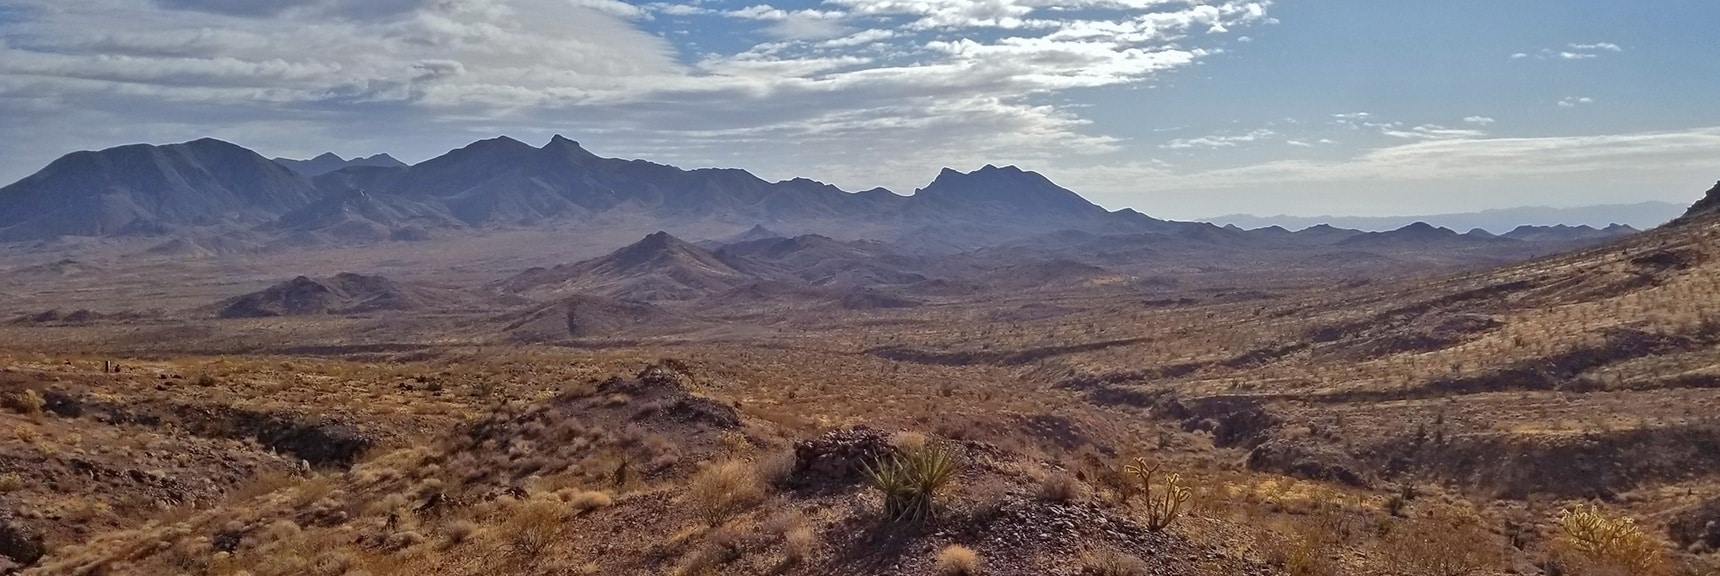 Looking East. Lake Mead is Beyond the Ridge System in View | McCullough Hills Trail in Sloan Canyon National Conservation Area, Nevada